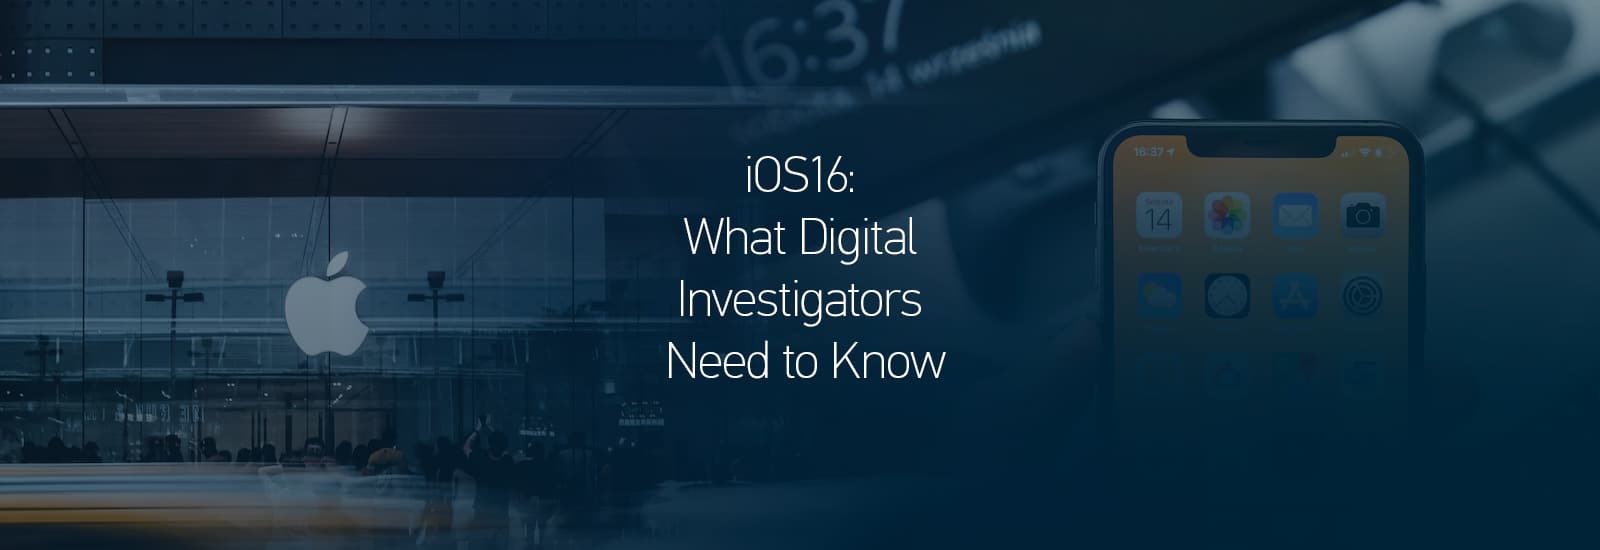 A decorative header for the blog post "iOS 16: What Digital Investigators Need to Know"